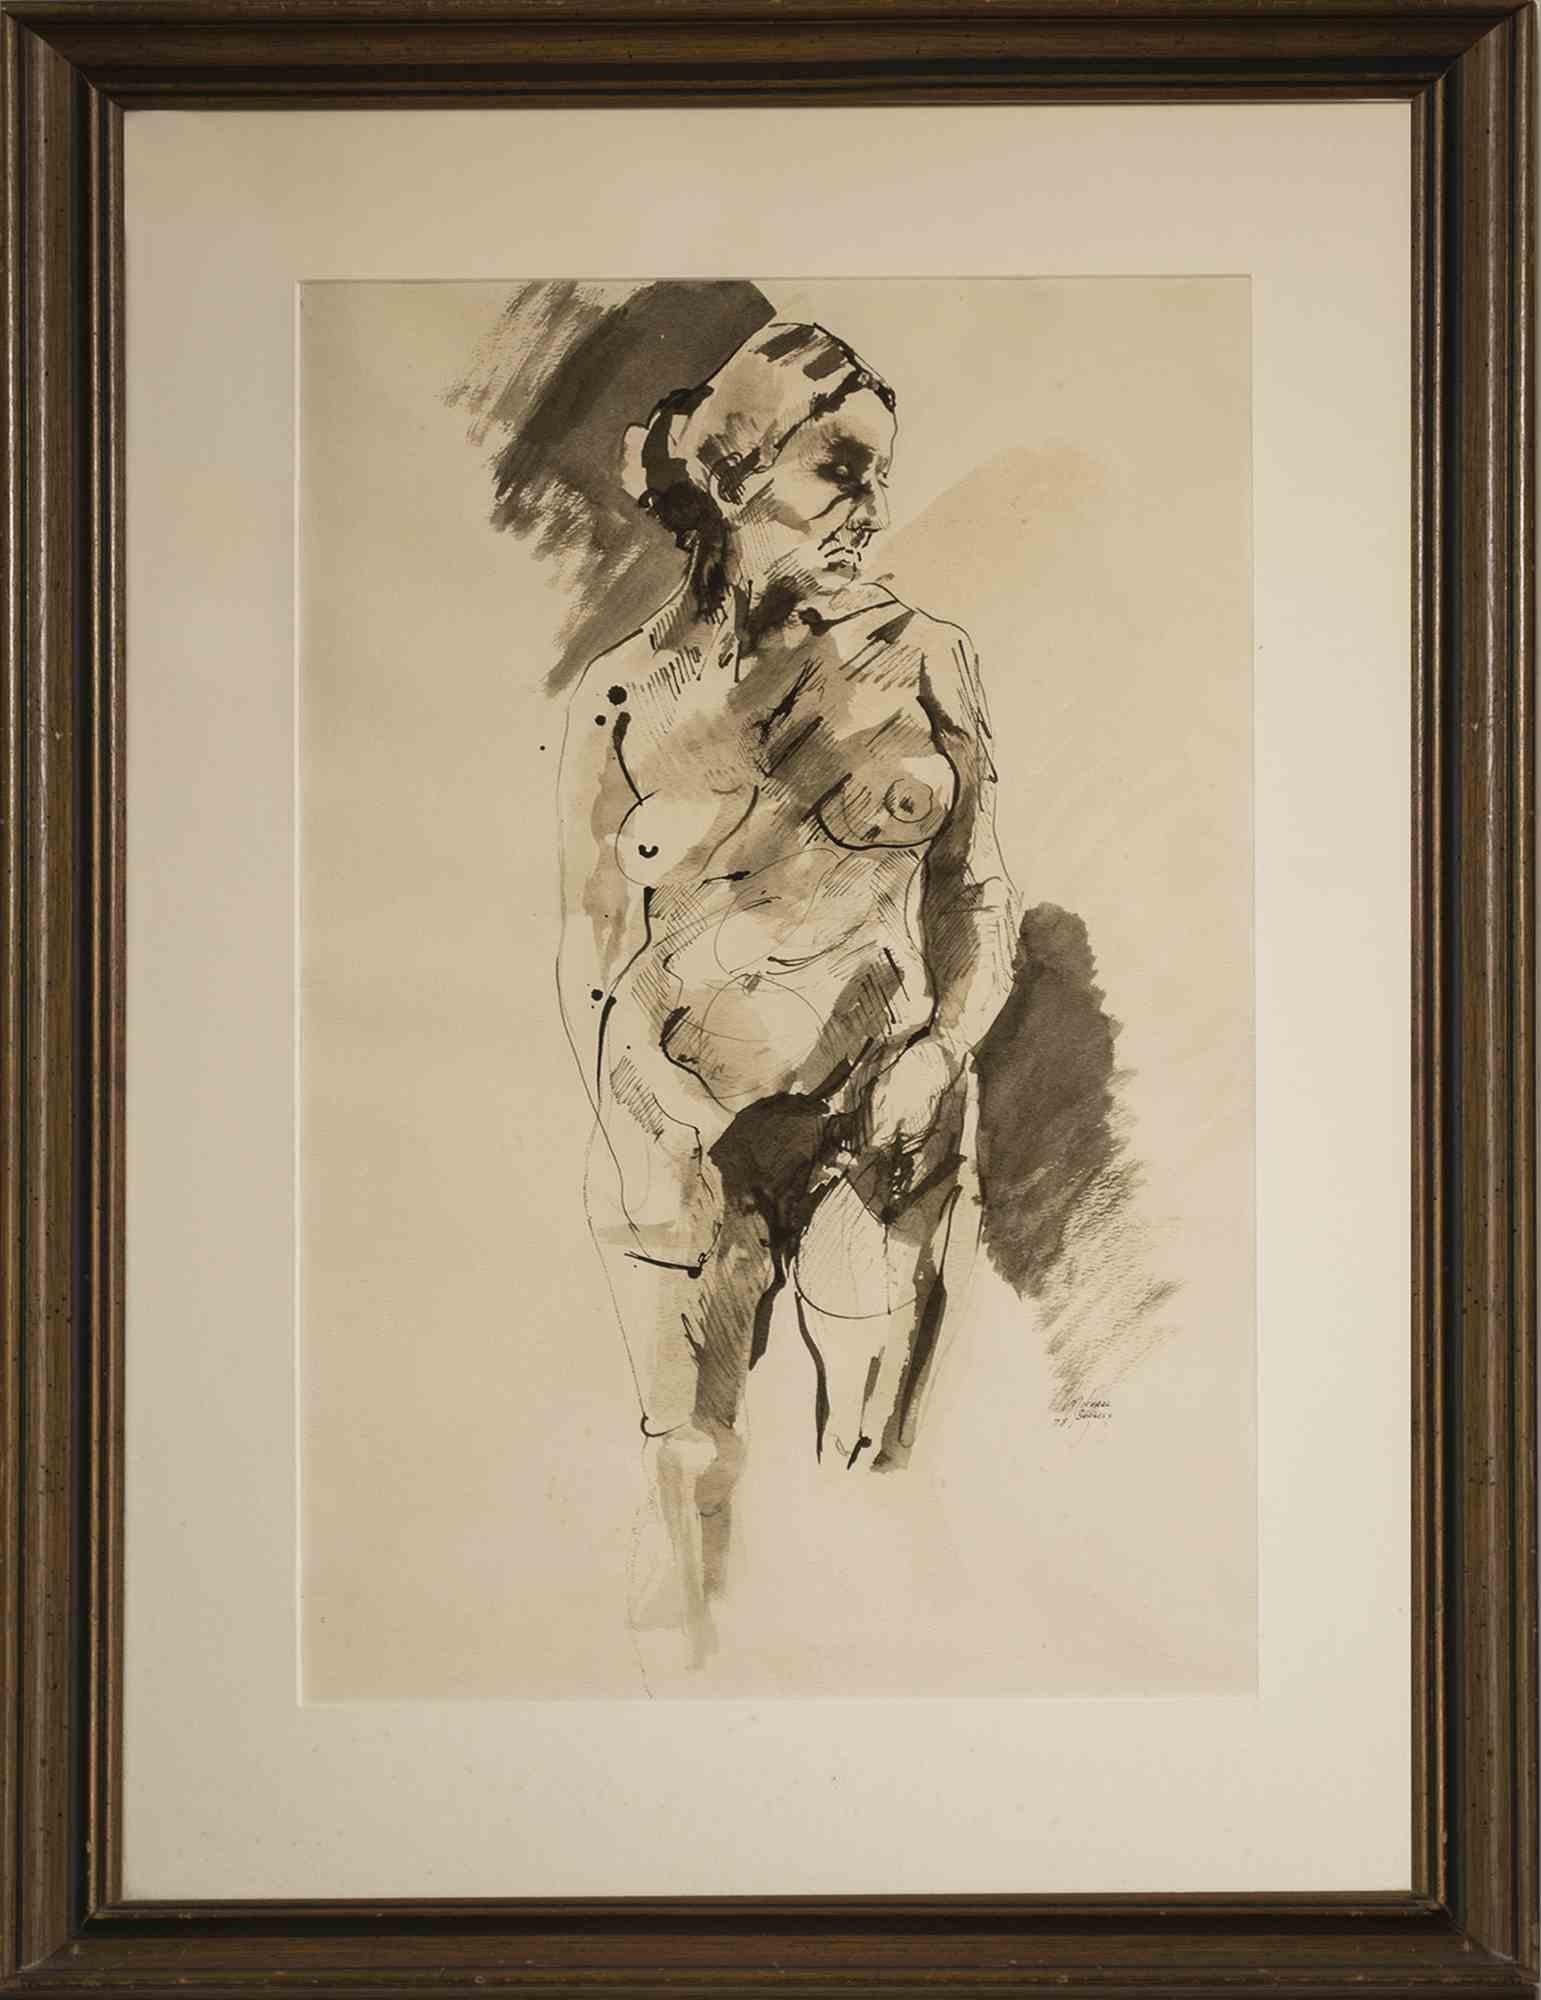 Life Drawing: Standing Female Nude, Pen & Ink, with Wash on Watercolor Paper. (Early work)

Life Drawing is as primordial as art itself.  Often it is more of an exercise as opposed to an intentional, finished work.  The use of Pen and Ink, with a